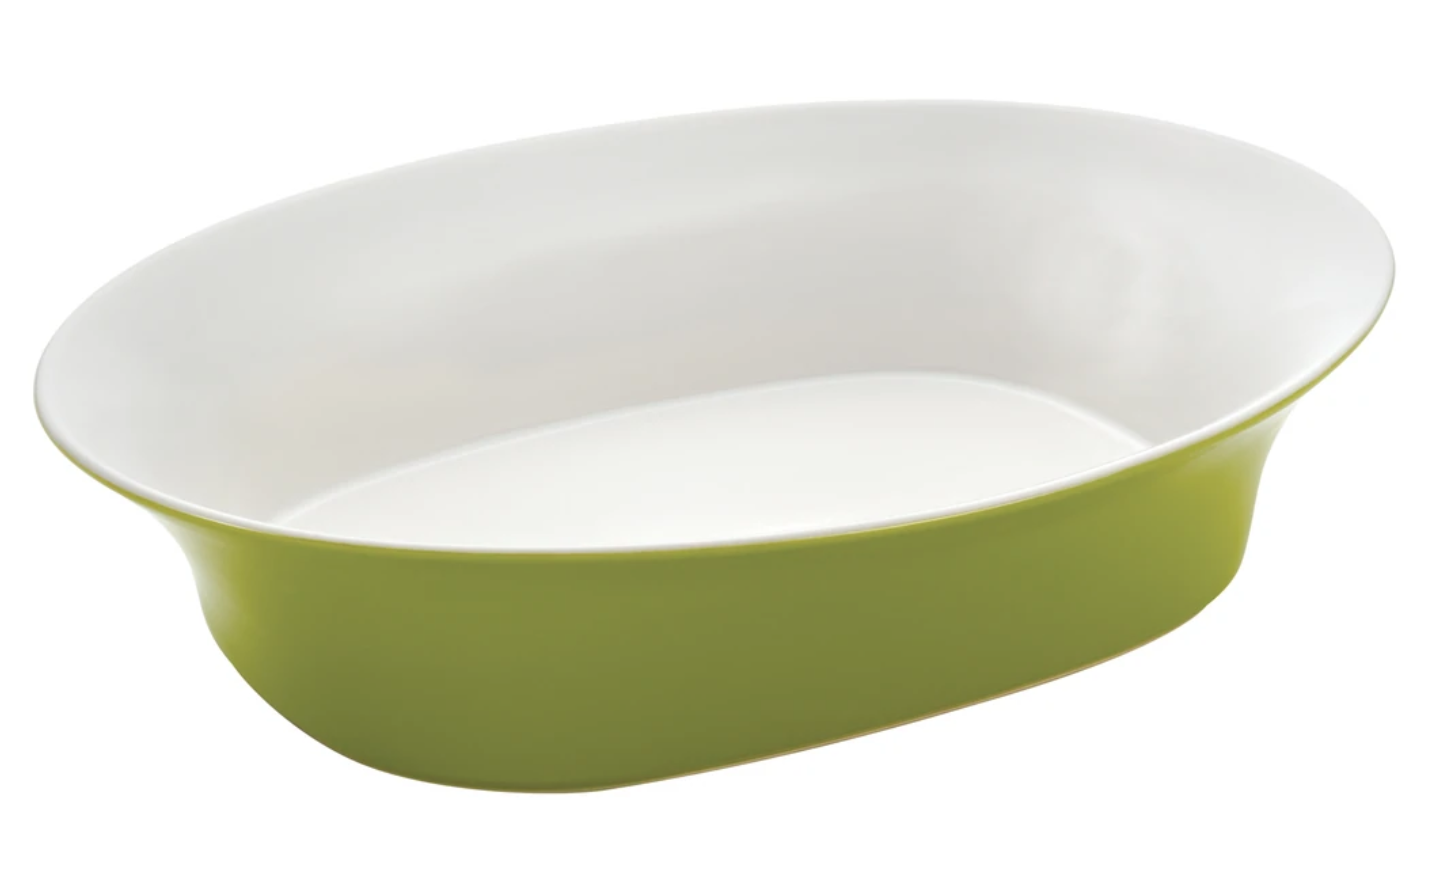 14-Inch Oval Serving Bowl